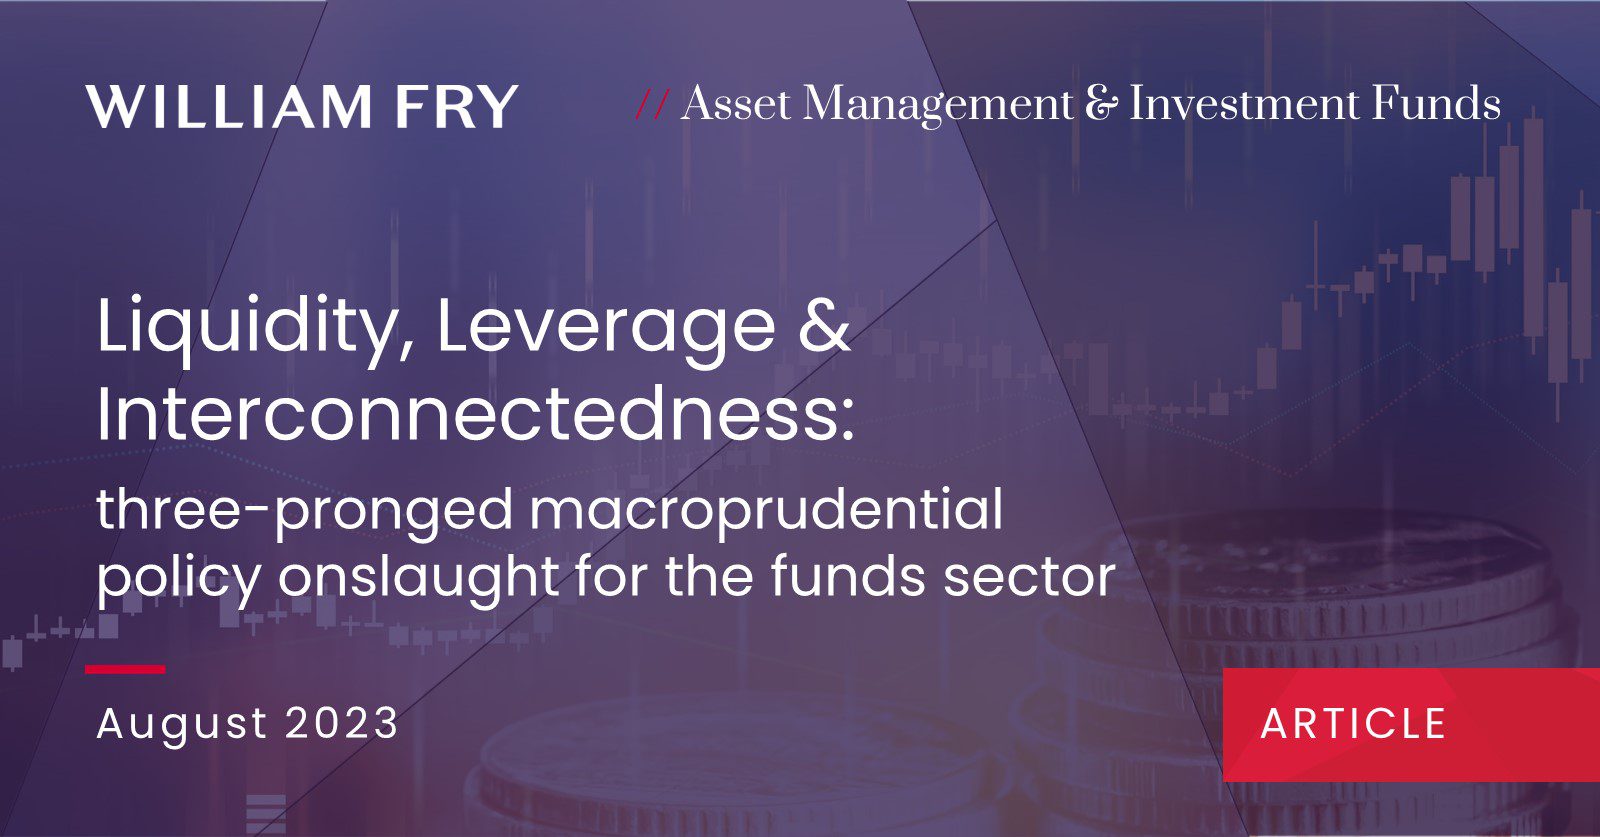 Liquidity, Leverage & Interconnectedness: three-pronged macroprudential policy onslaught for the funds sector